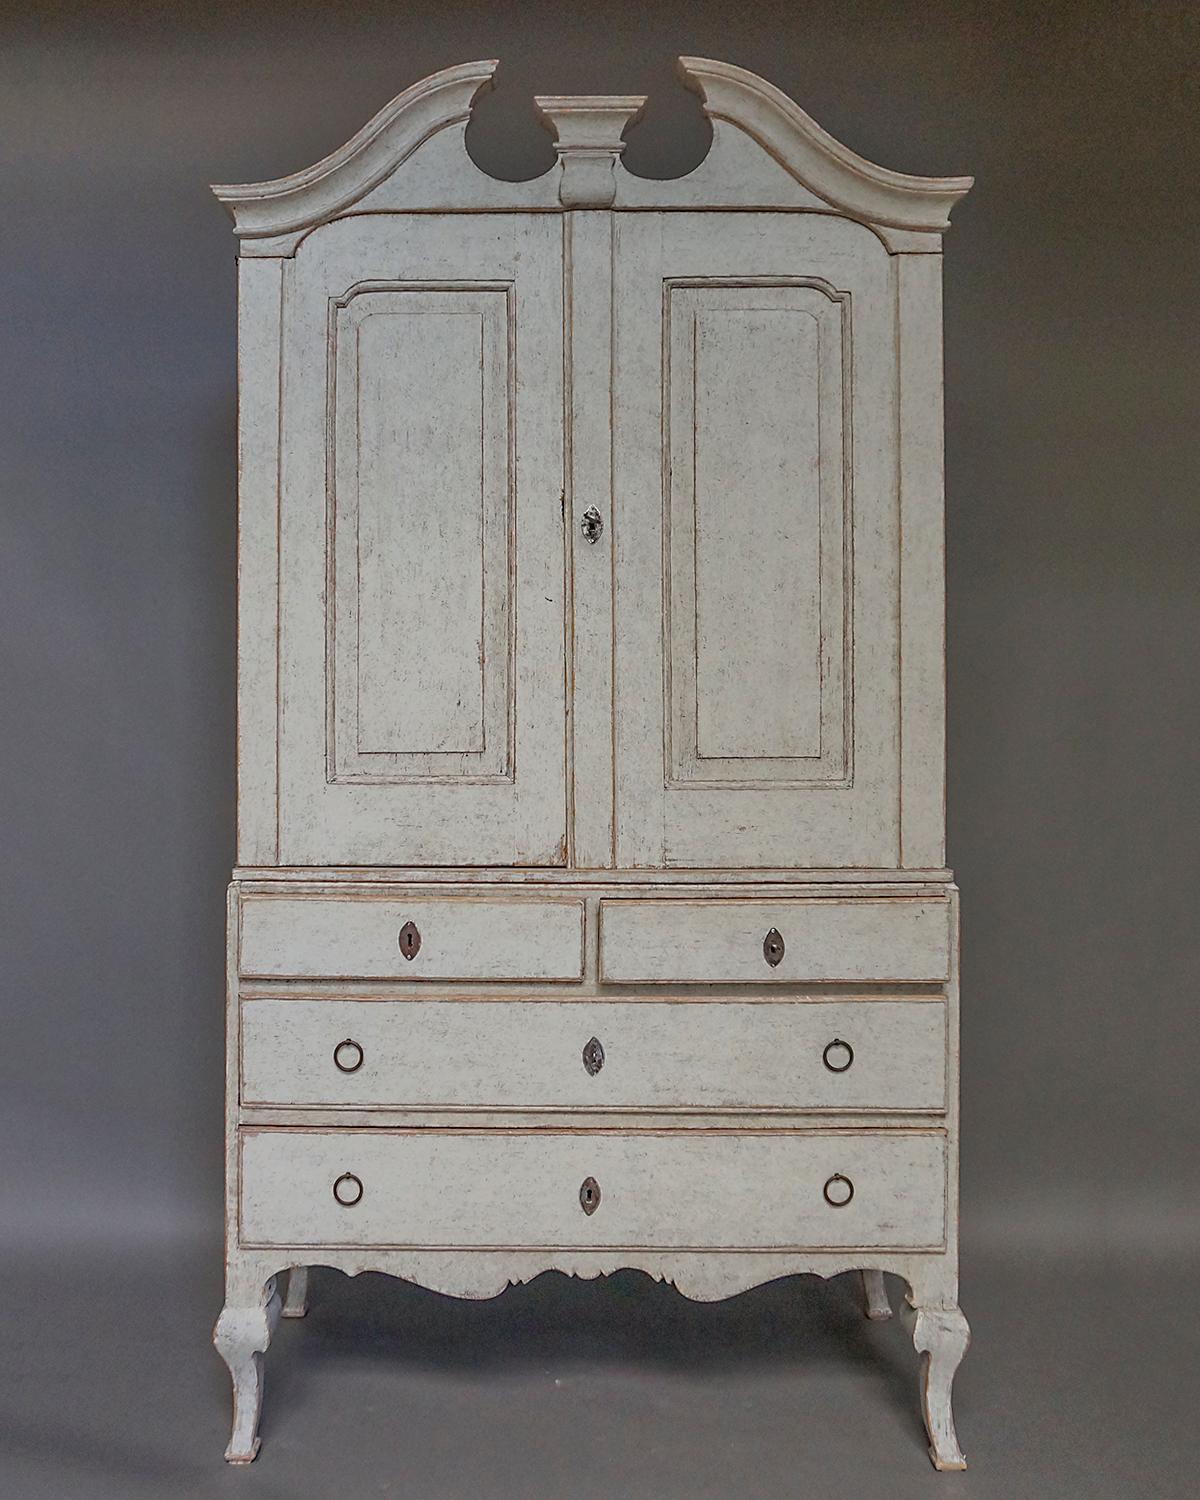 Rococo cabinet in two parts, Sweden circa 1760, with original pulls and locks. The upper section has a broken arch cornice over a pair of doors with beautifully shaped raised panels. Inside are two fixed shelves over two small drawers. The lower